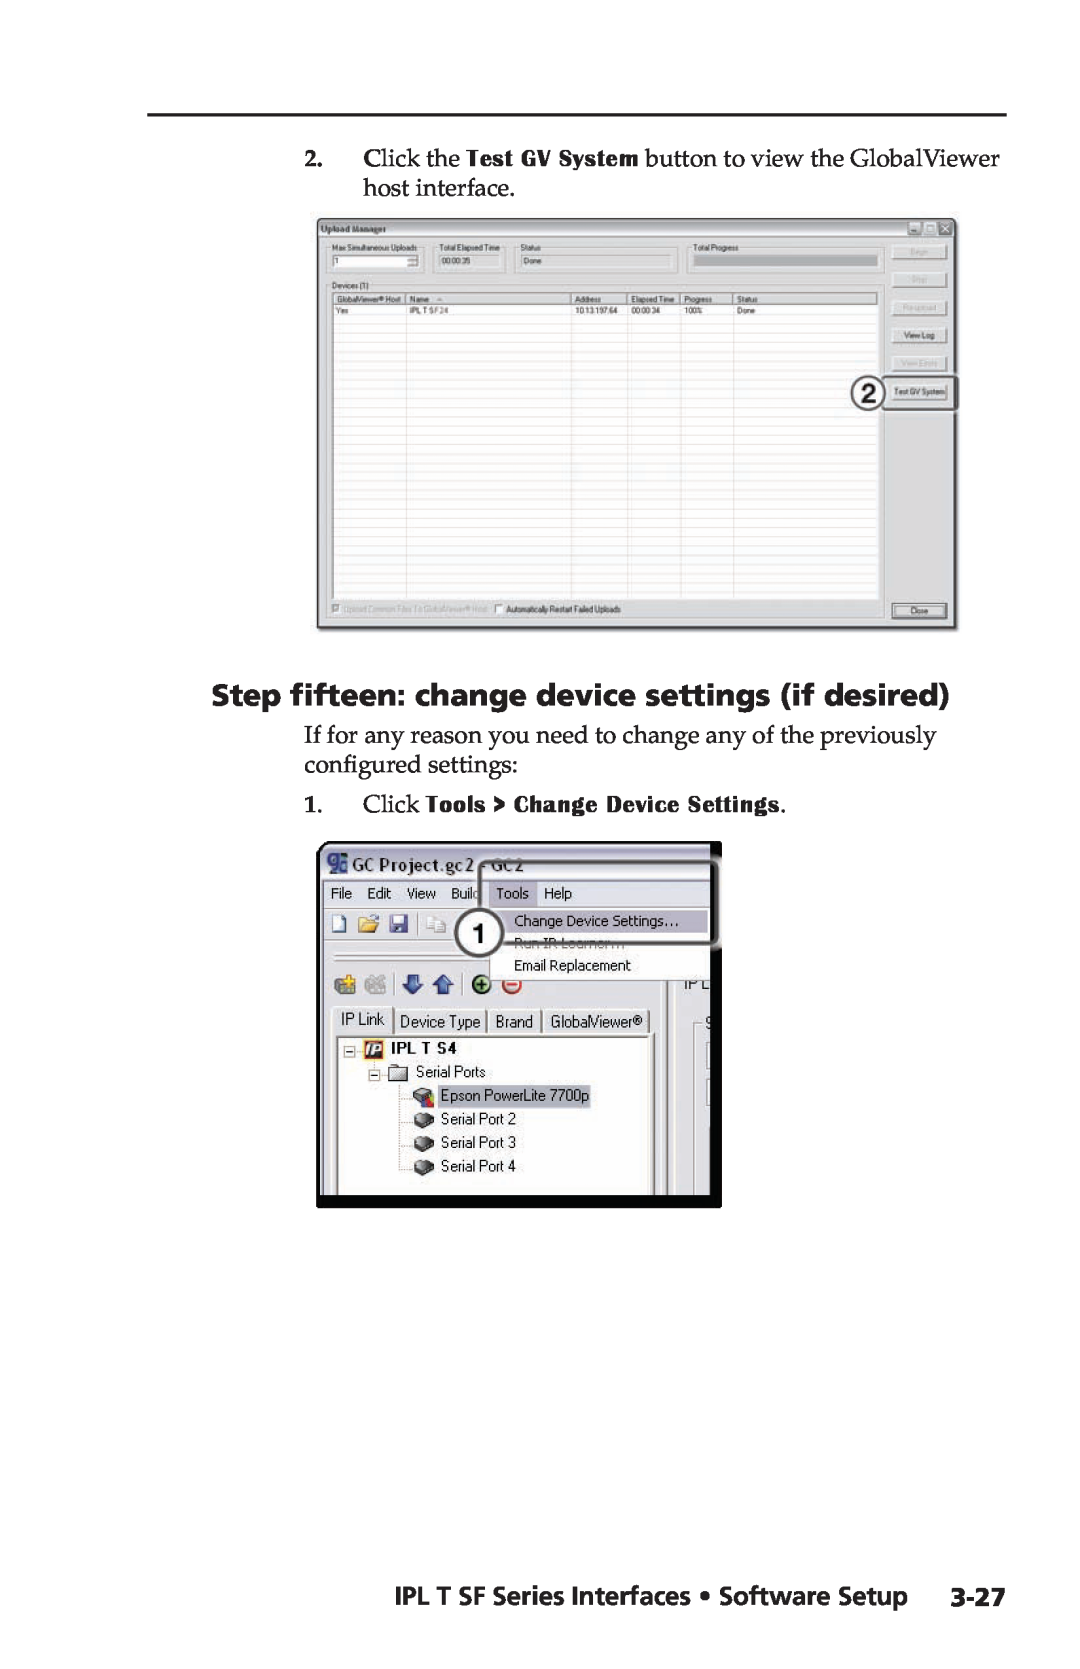 Extron electronic IPL T SF Series Step fifteen change device settings if desired, Click Tools Change Device Settings 